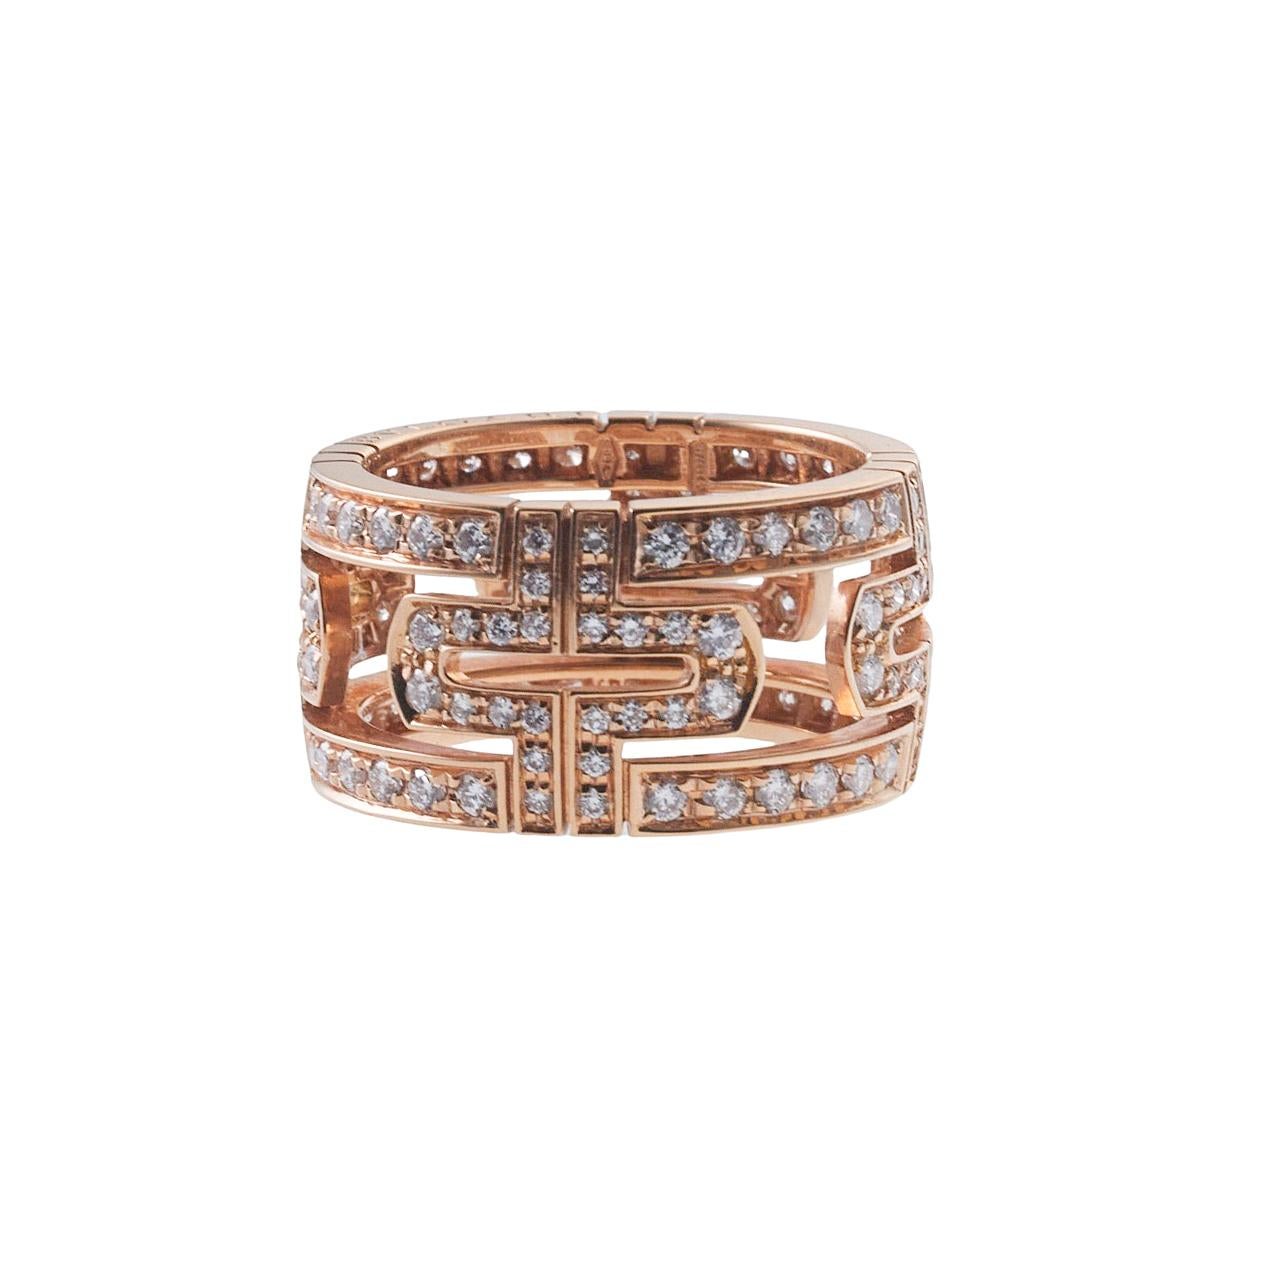 Bvlgari Parentesi collection 18k rose gold band, seet with approx. 1.50ctw in VS/G diamonds. Ring size 7, top measures 11.5mm wide. Marked: Bvlgari, made in Italy, 750,55. Weight is 8.8 grams.